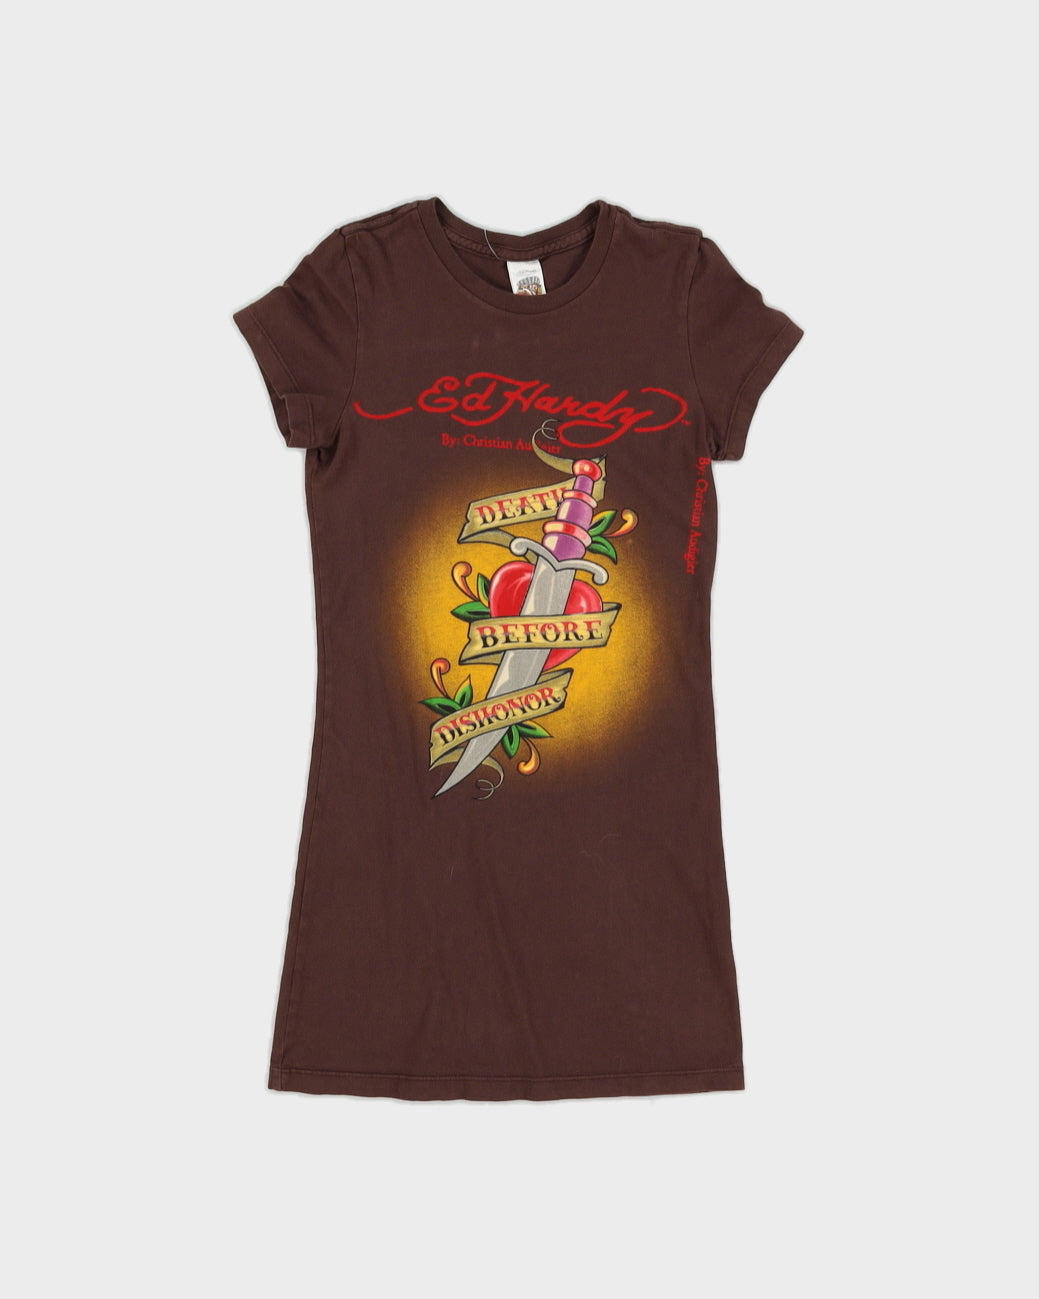 00s Y2K Ed Hardy Brown T-Shirt With Graphic - S